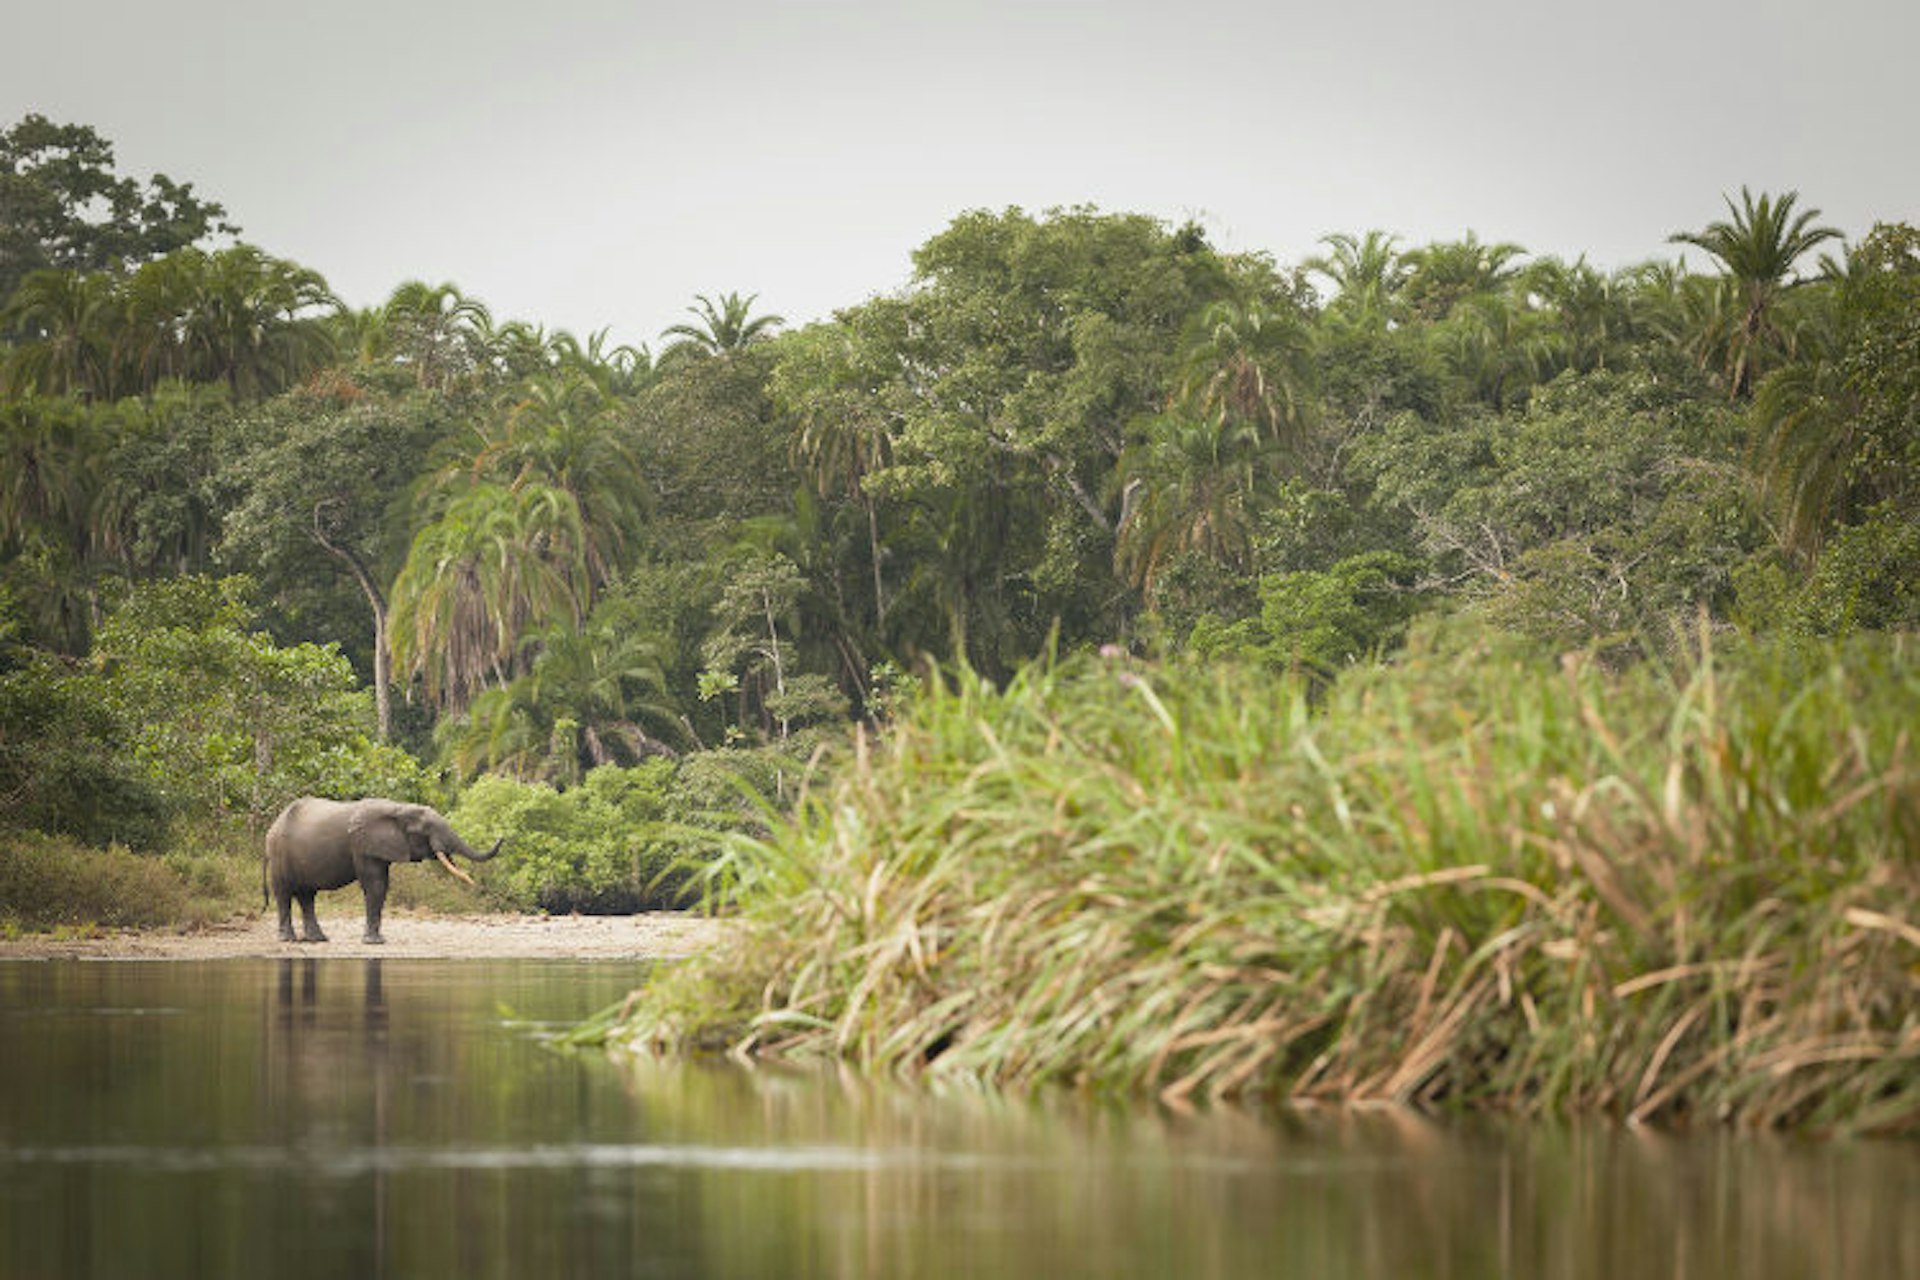 Forest Elephant, Lekoli River; Republic of Congo : Stock Photo     View similar images     More from this photographer     Download comp A forest elephant, Lekoli River, Republic of Congo. Image by Cultura Travel / Philip Lee Harvey / Getty Images